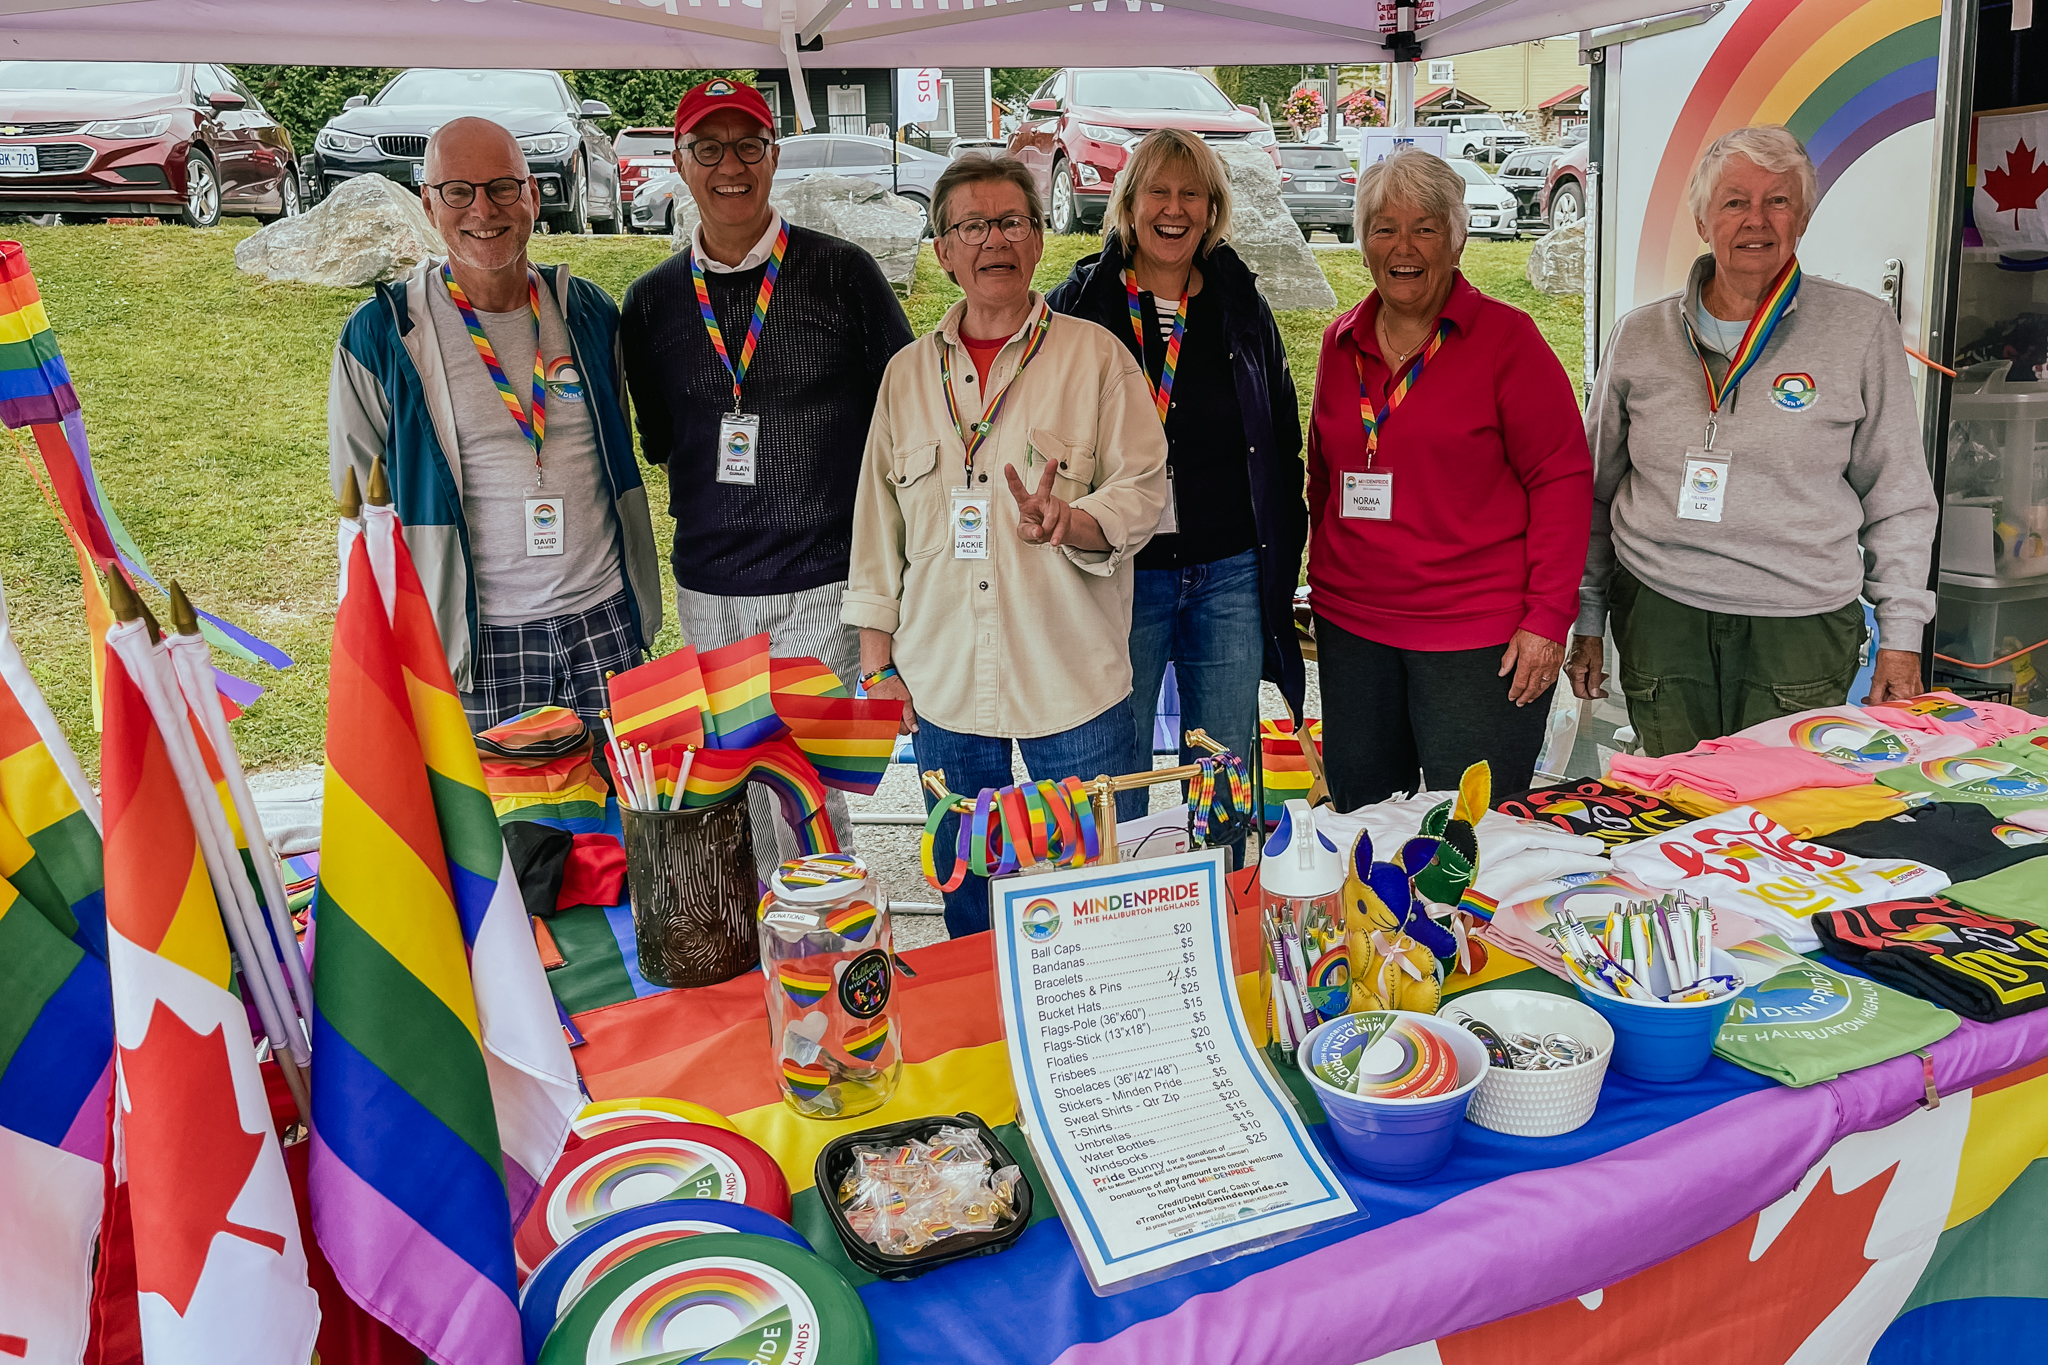 6 smiling volunteers with badges hanging around their necks pose behind a display table full of rainbow flags and inspirational memorabilia